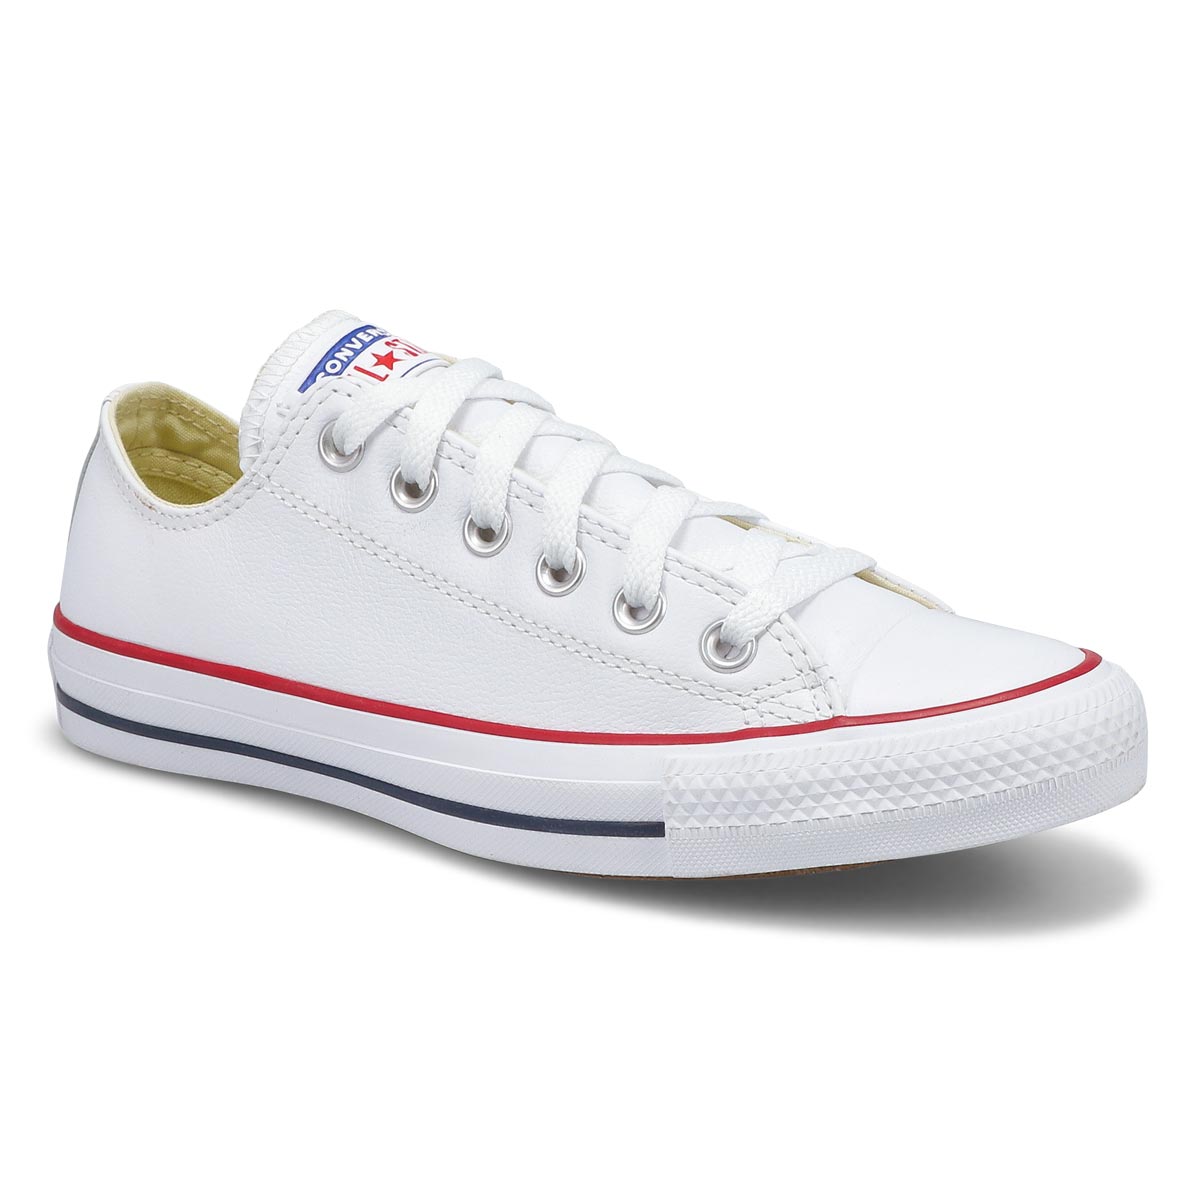 Women's All Star Leather Ox Sneaker -  White